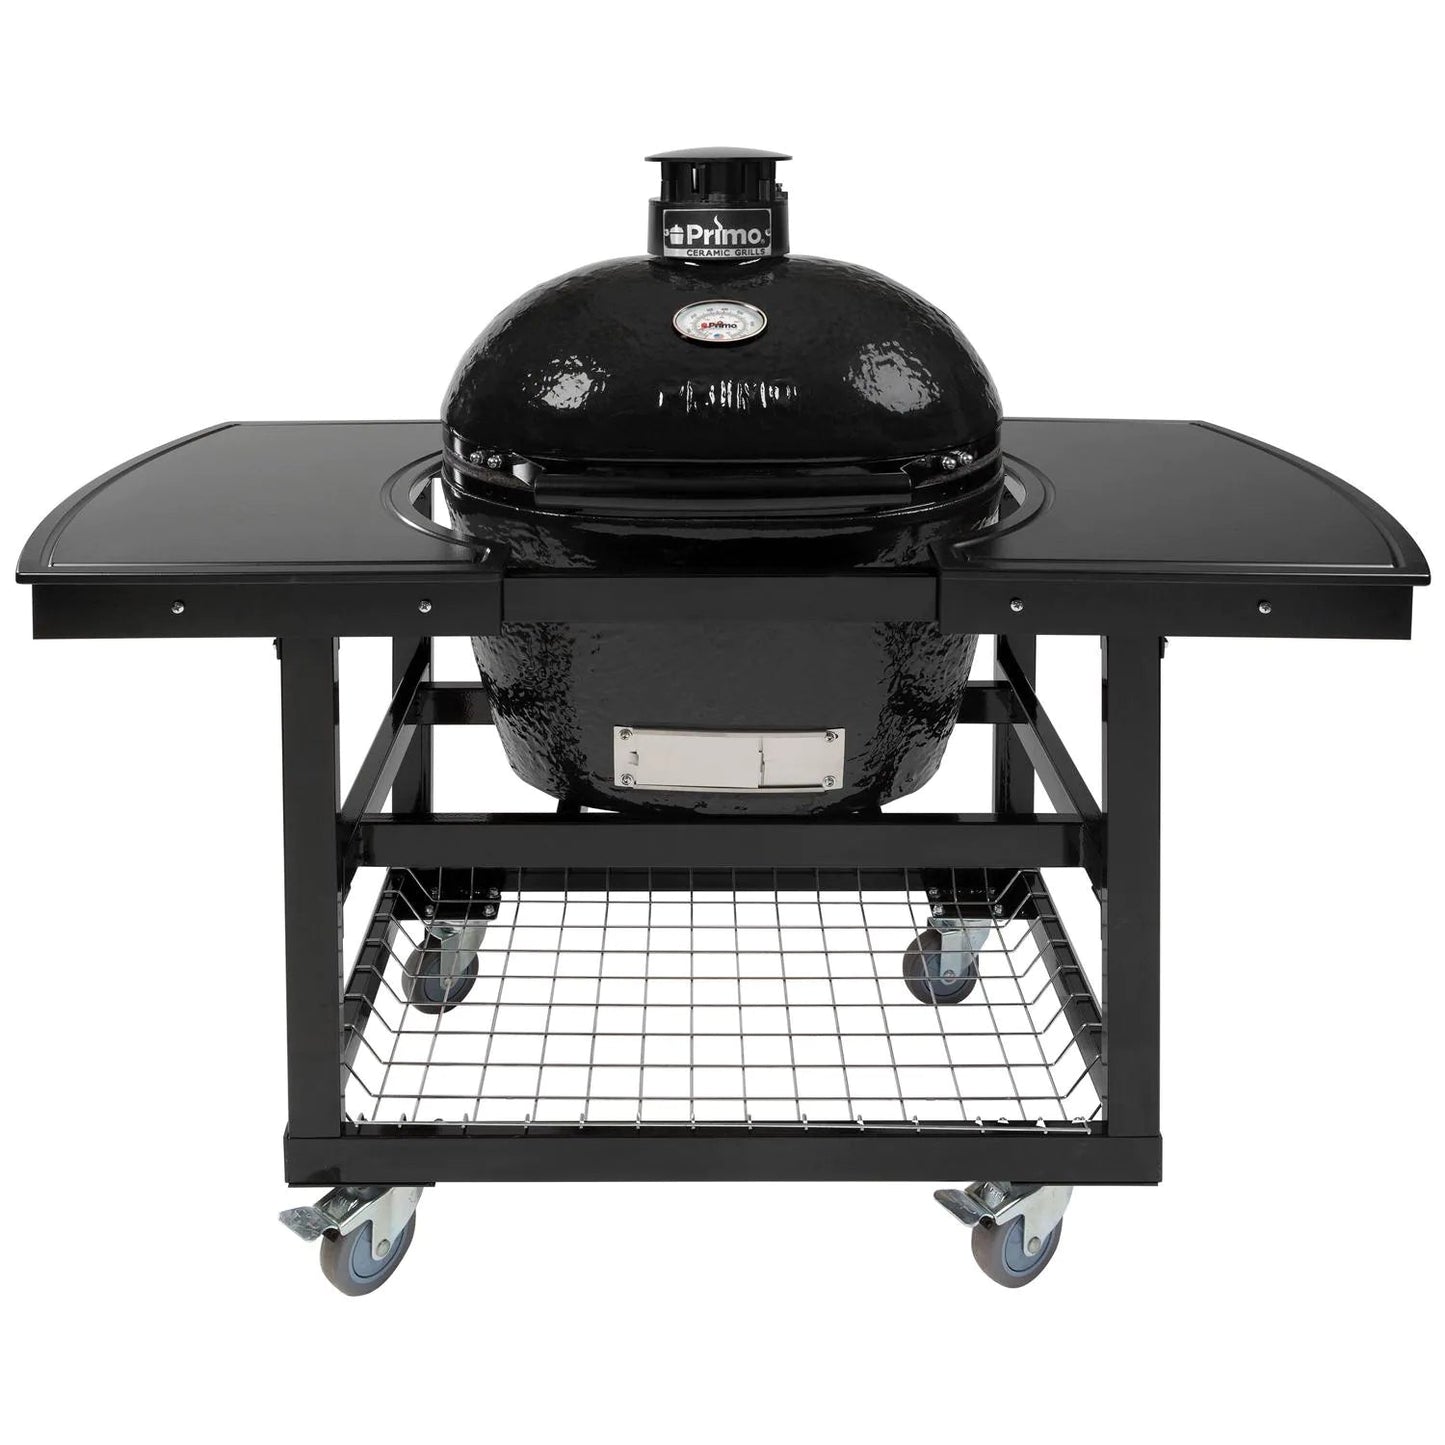 Primo Large 300 Oval Ceramic Kamado Grill with Stainless Steel Grates - PGCLGH - Grills N More